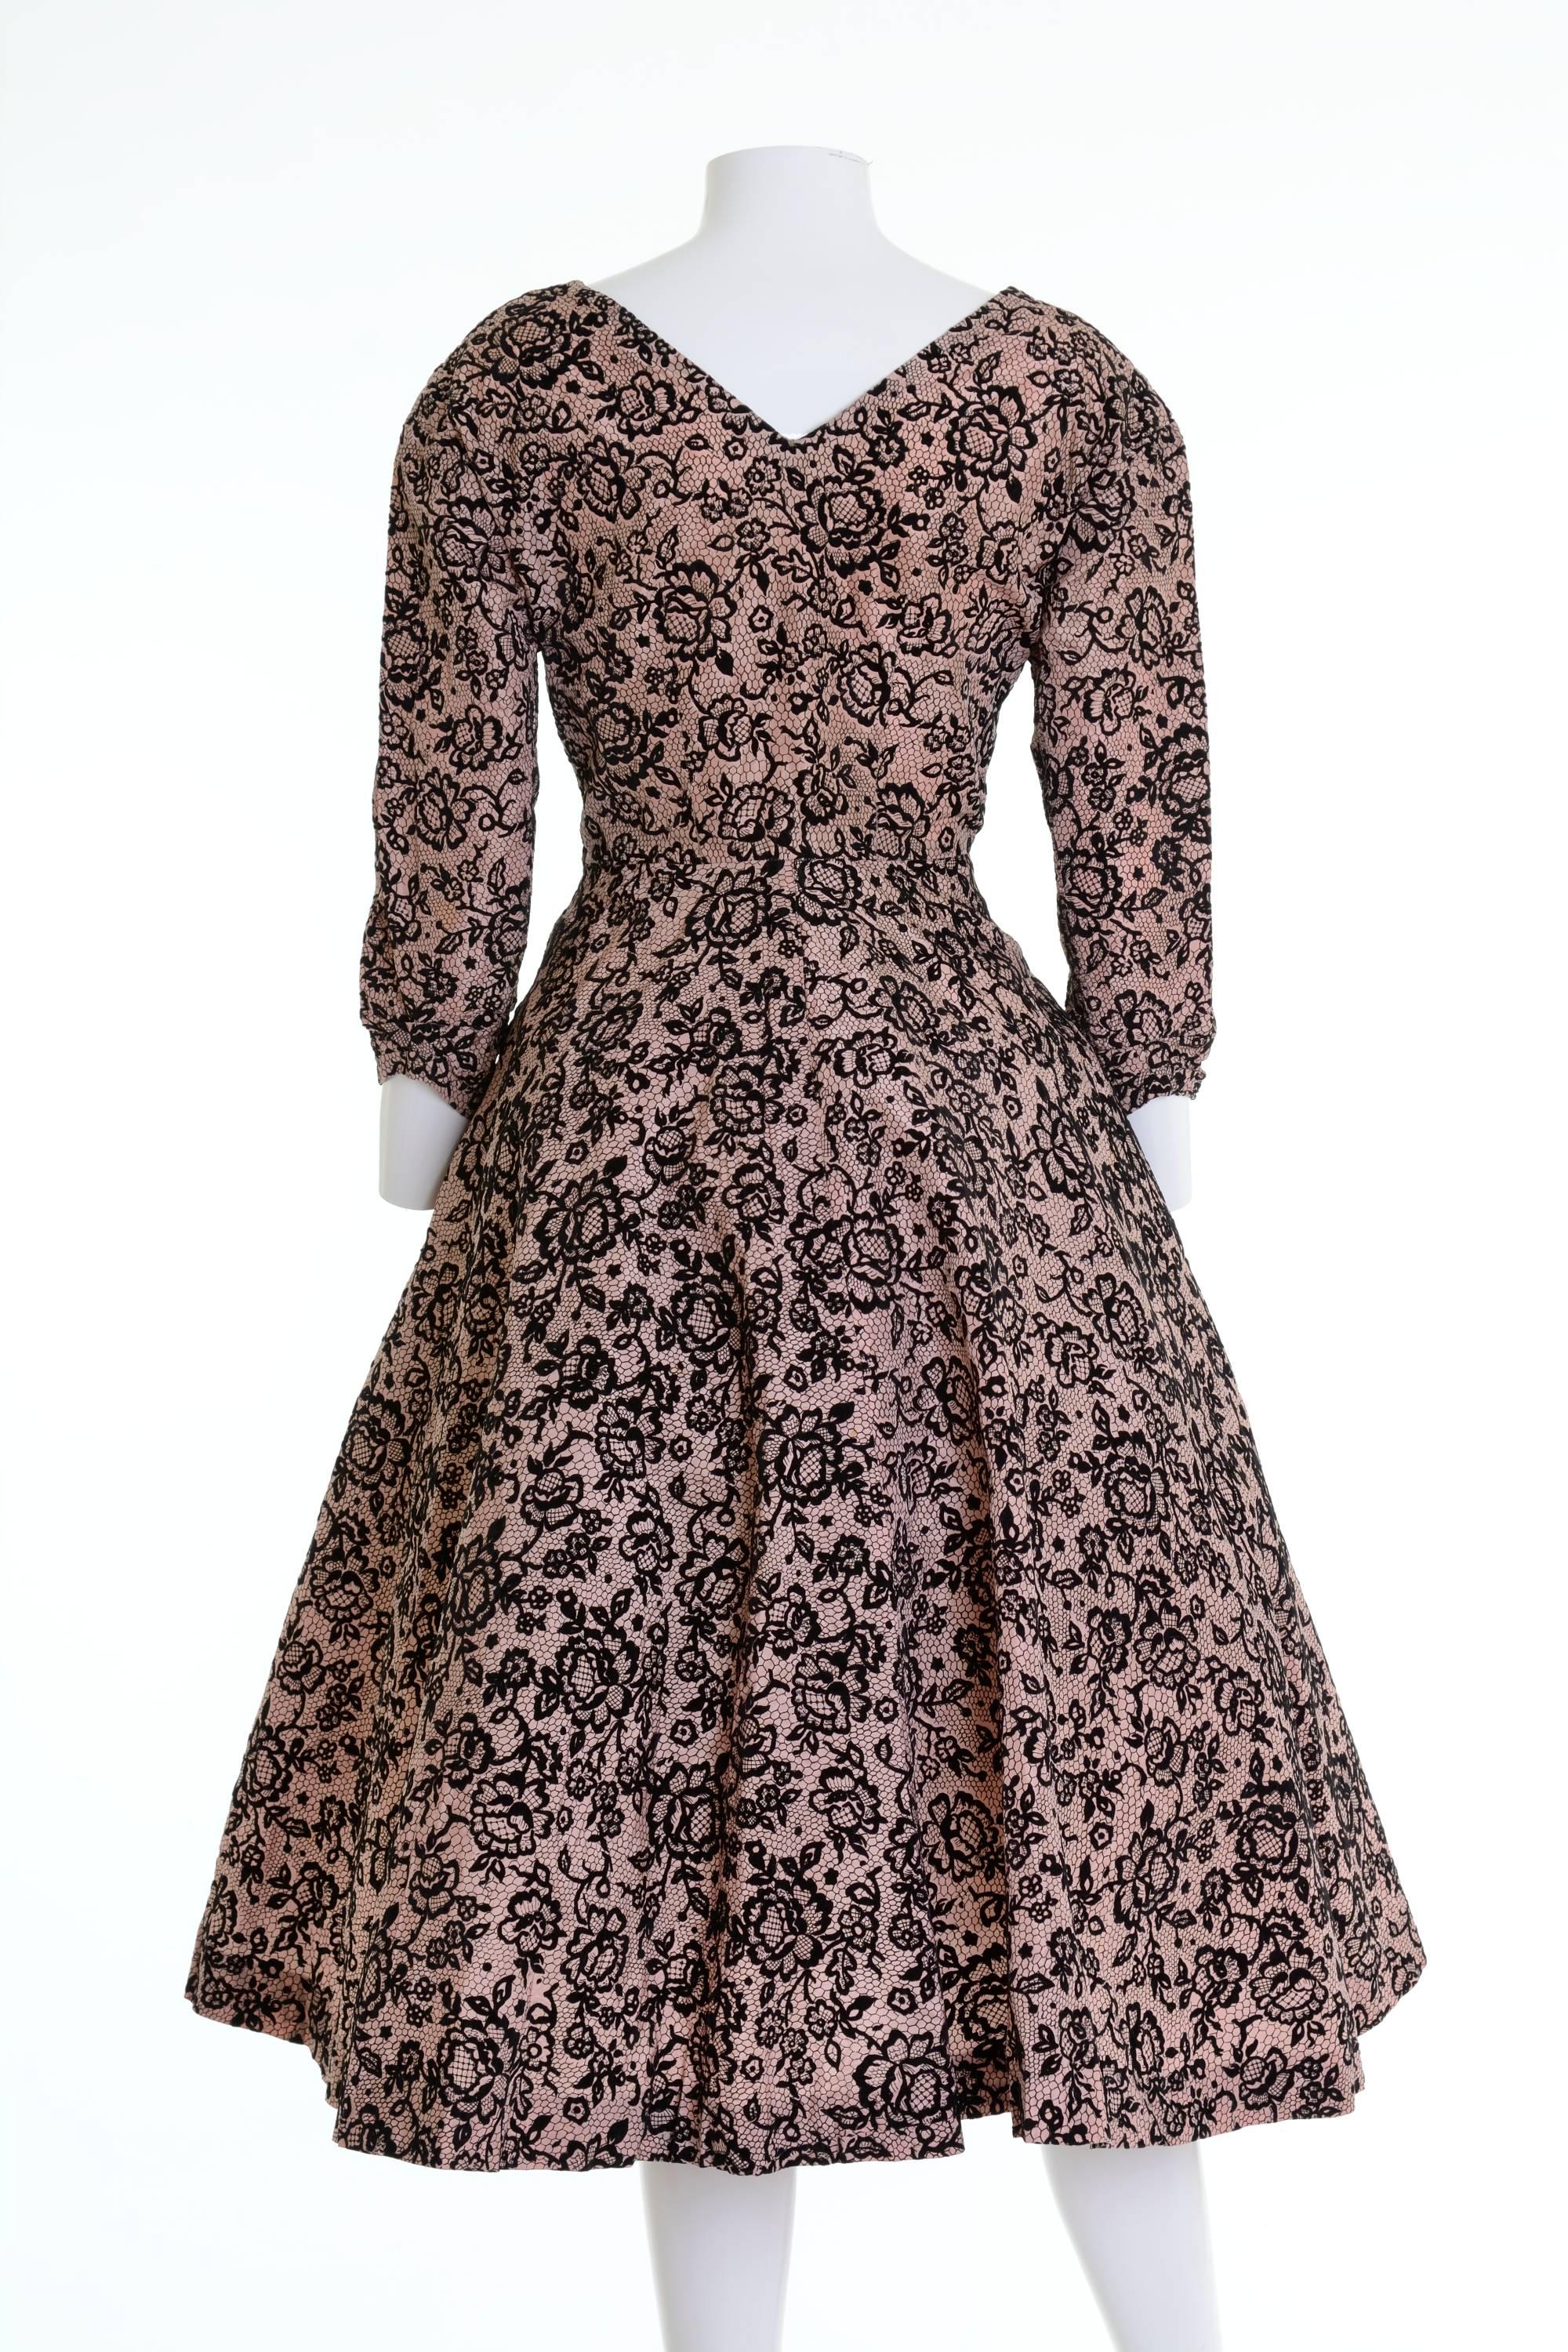 1950s Vintage Black and Powder Pink Brocade Cocktail New Look Circle Dress In Good Condition For Sale In Milan, Italy